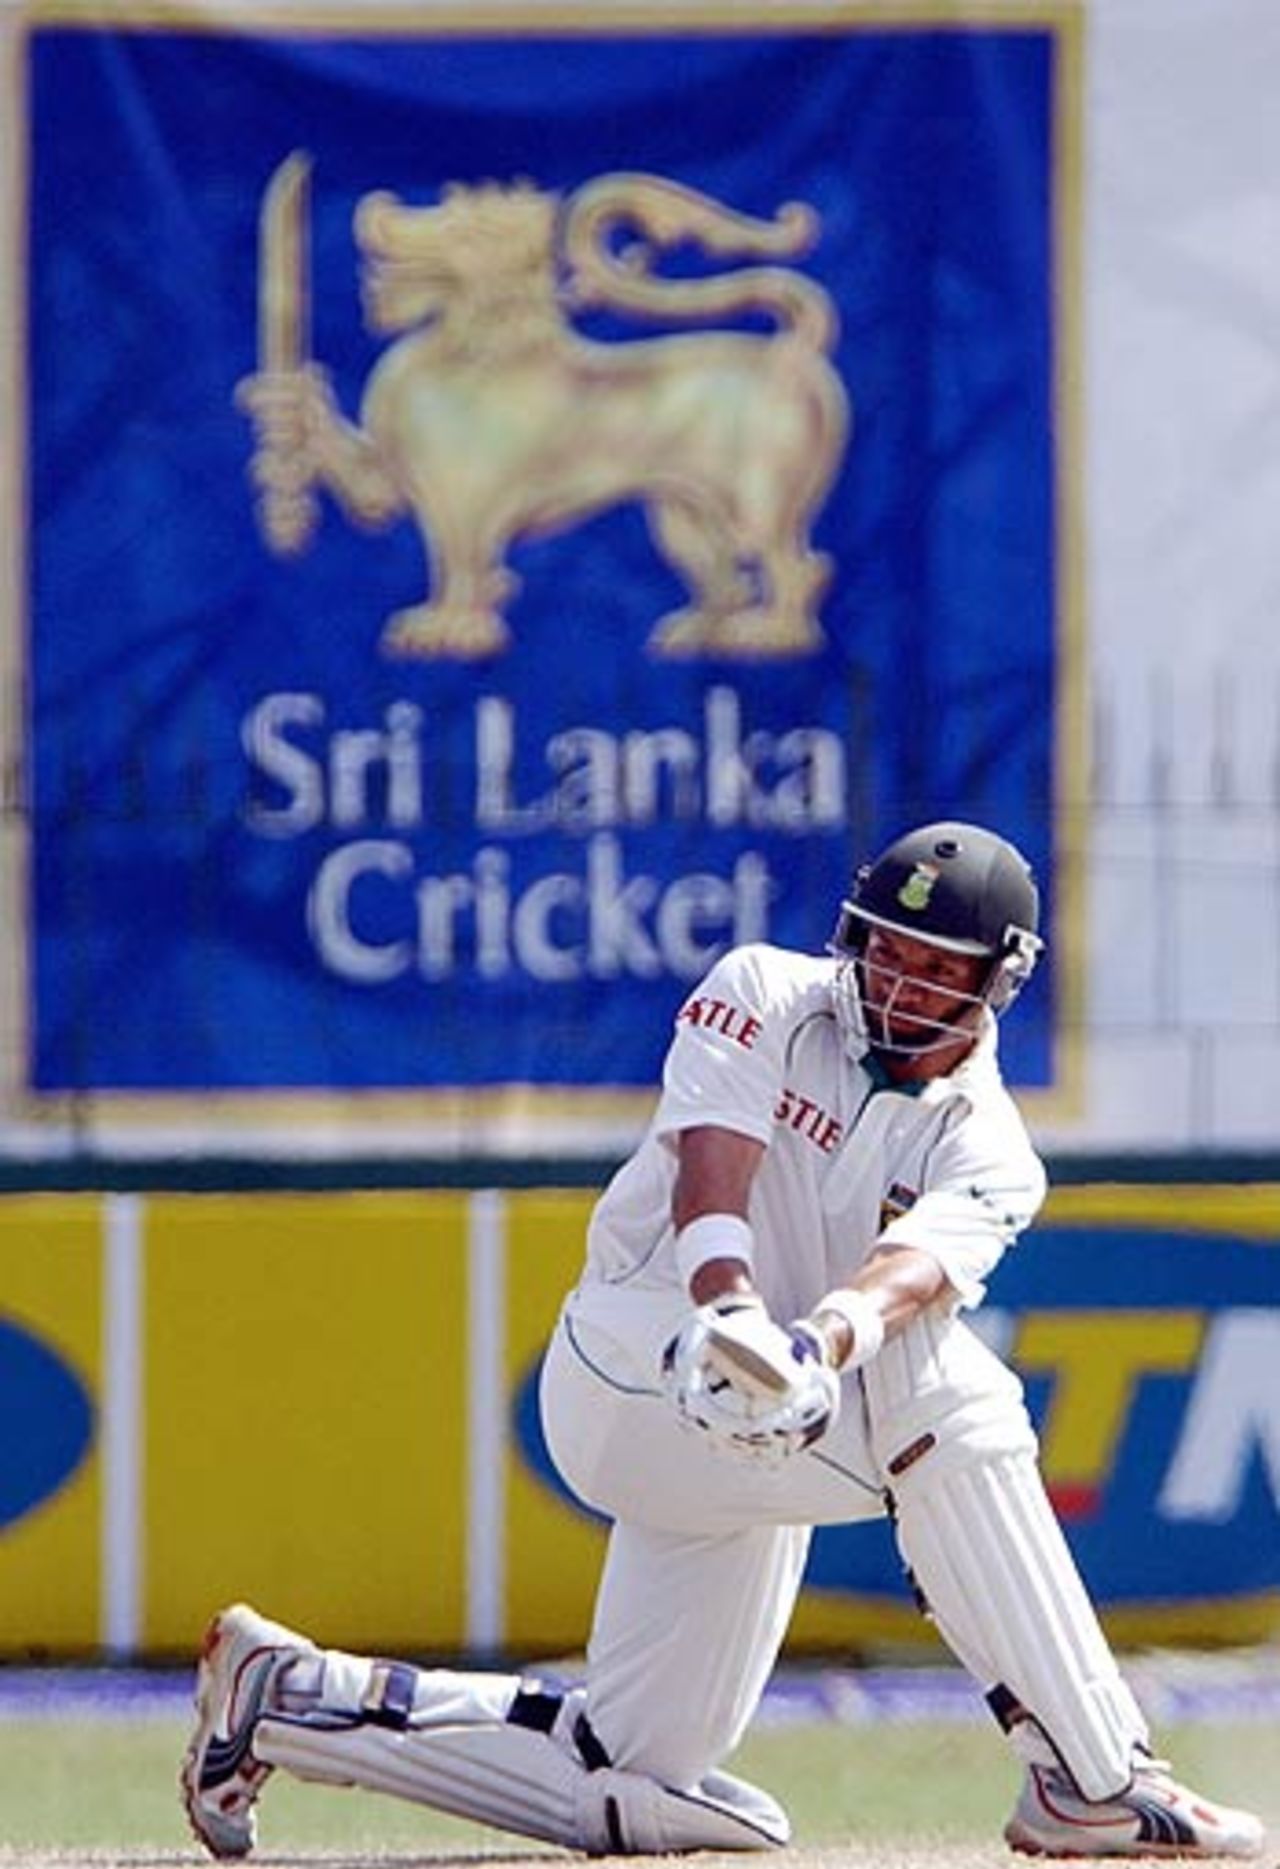 Ashwell Prince counters the spin with ease, Sri Lanka v South Africa, 1st Test, Colombo (SSC), 4th day, July 30 2006